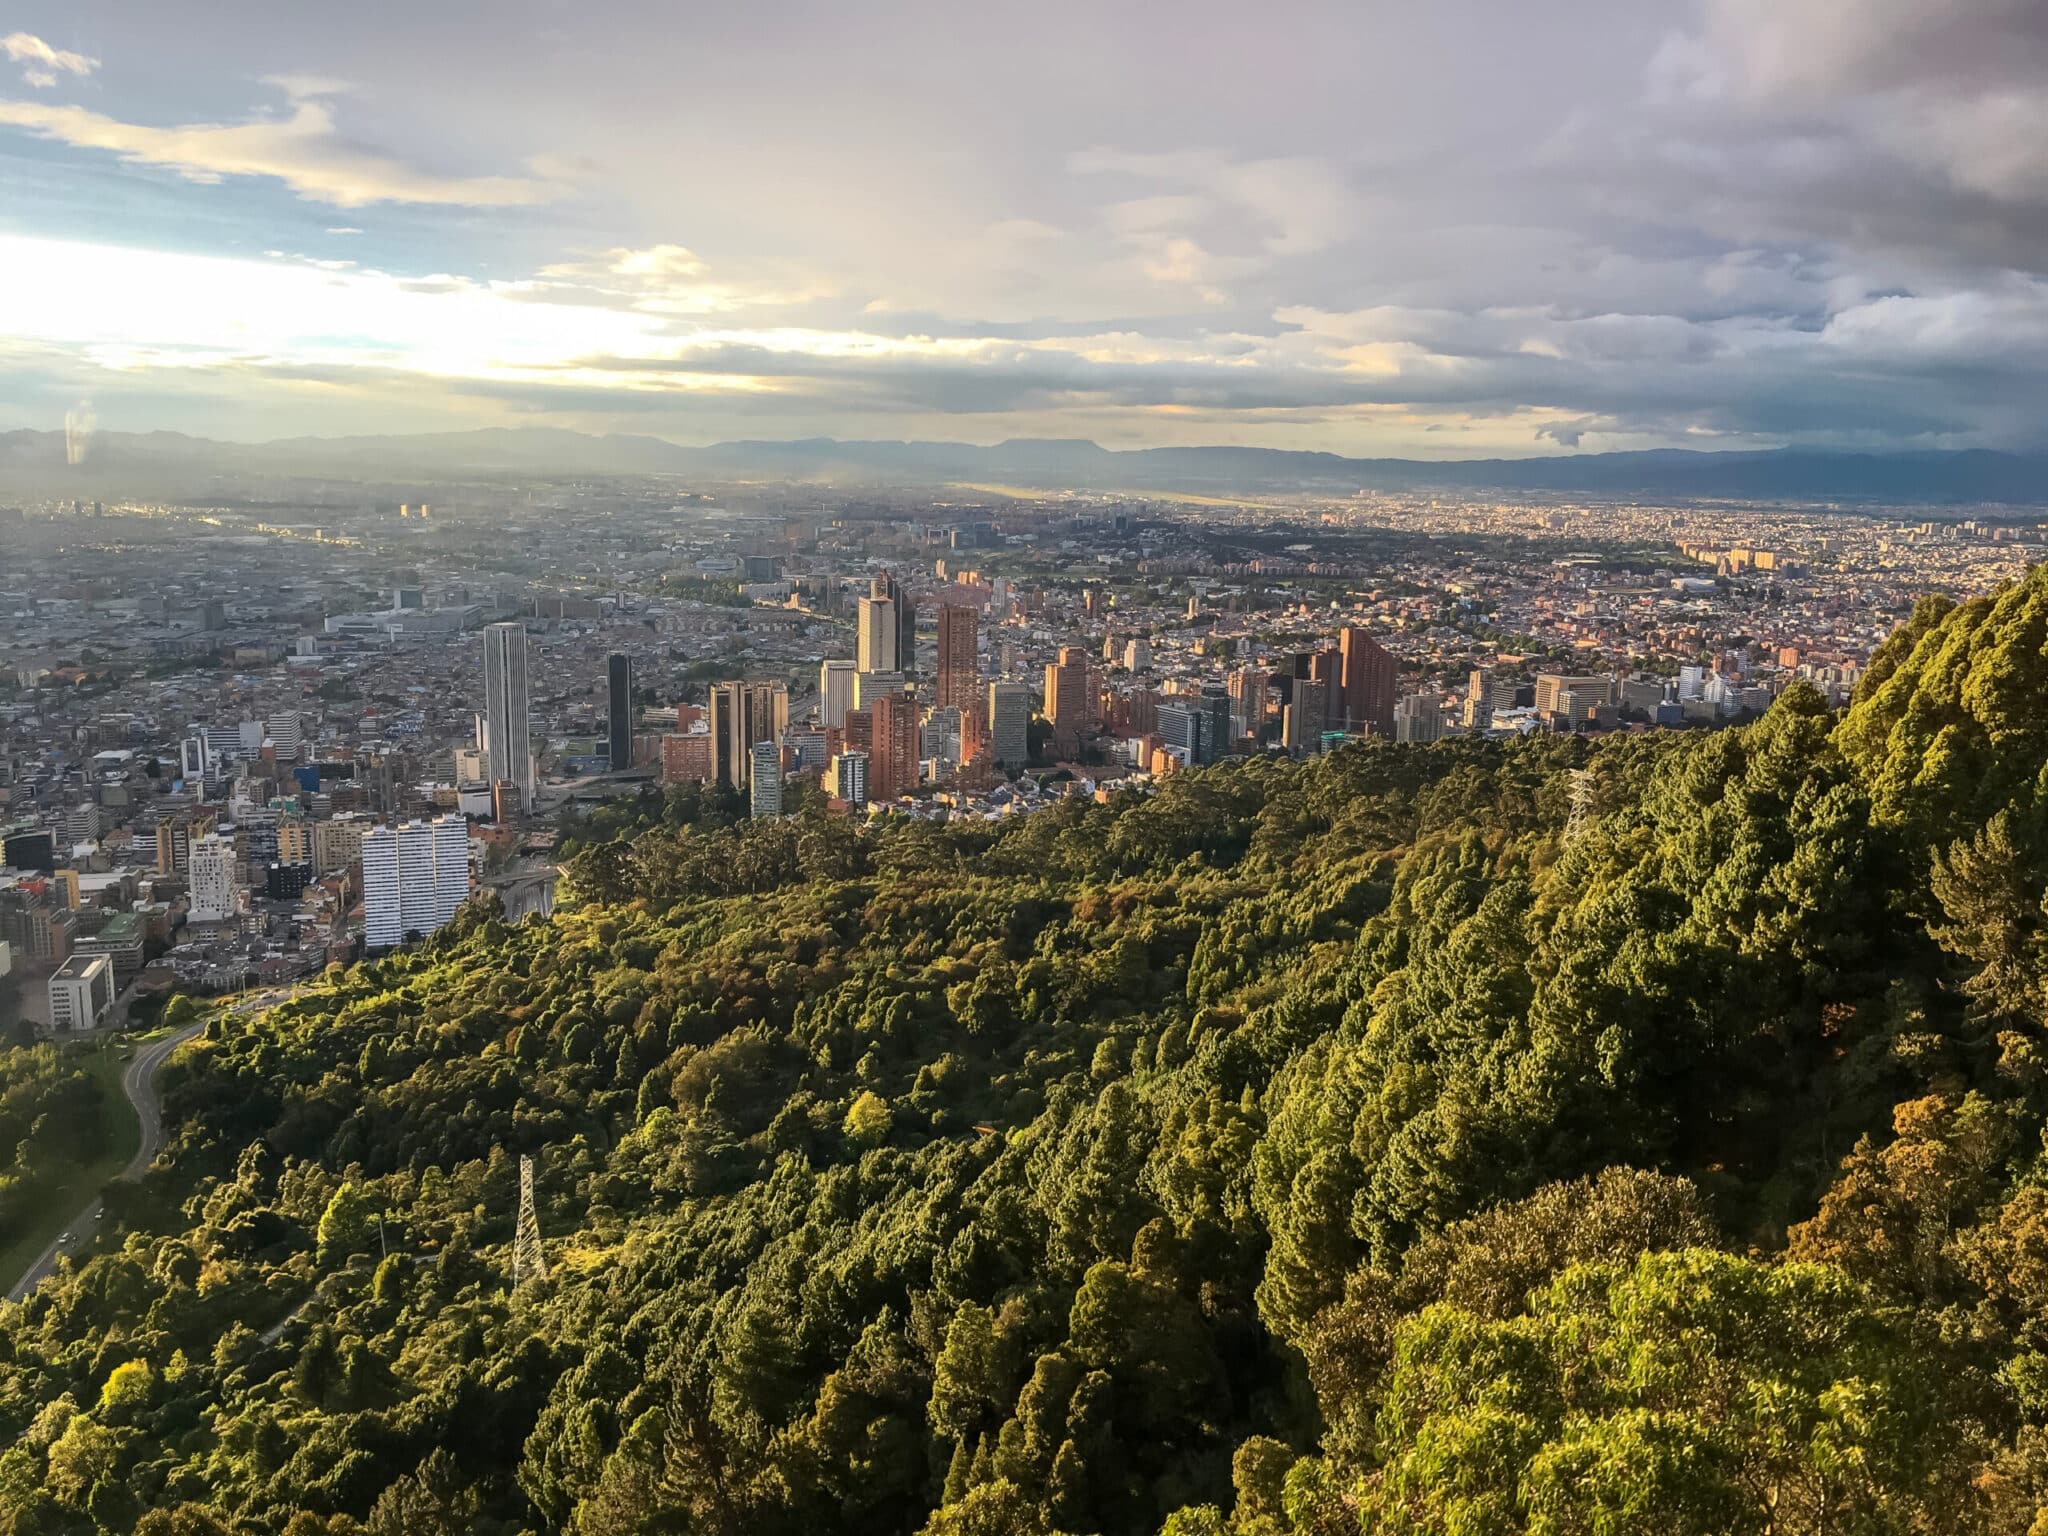 A watershed with the city of Bogota, Colombia in the background.